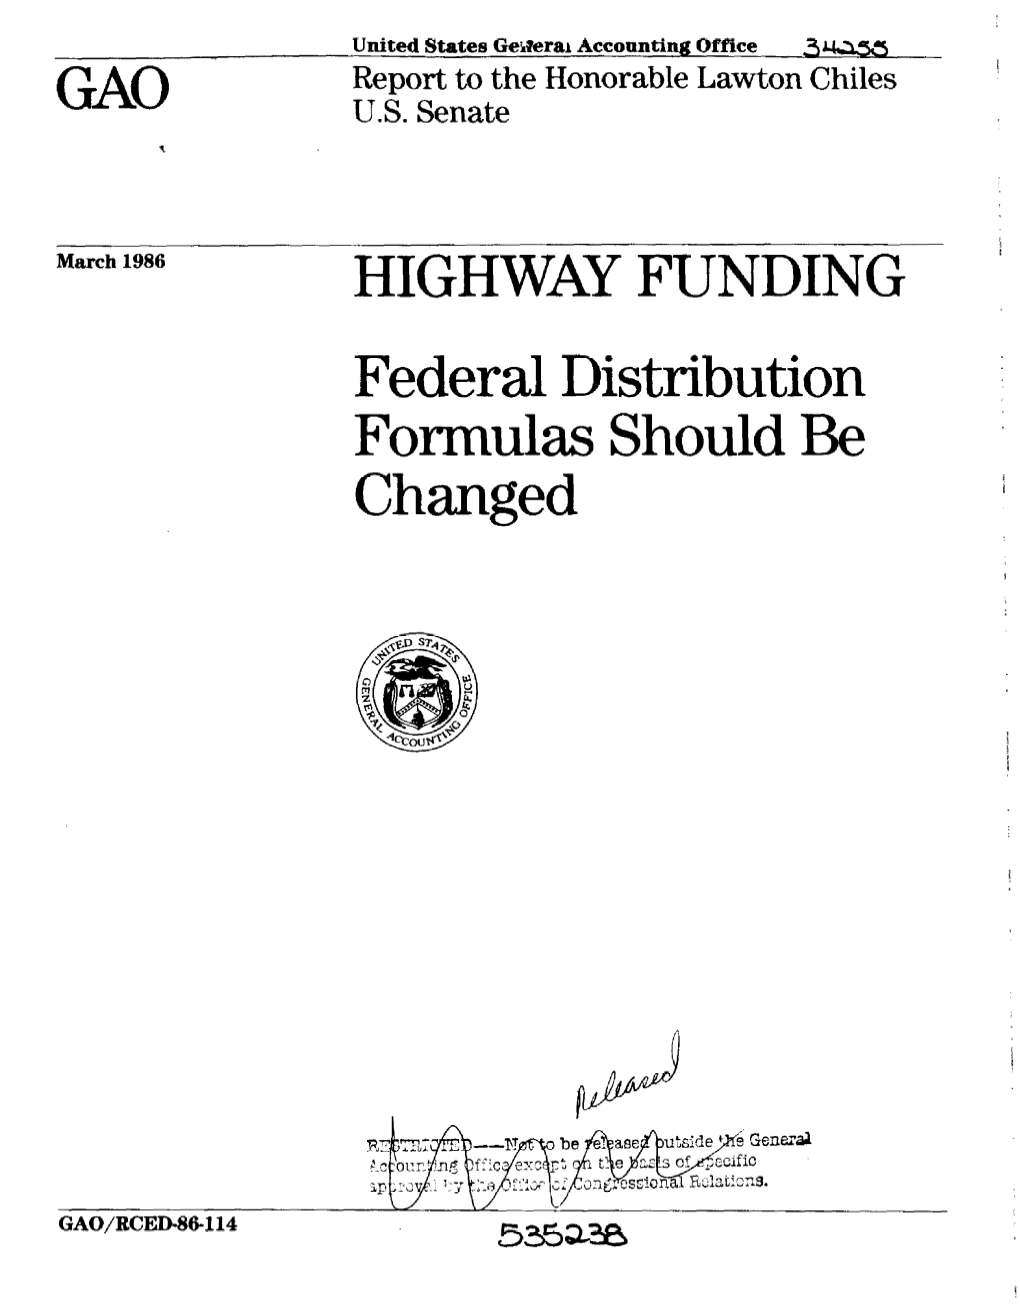 Federal Distribution Formulas Should Be Changed